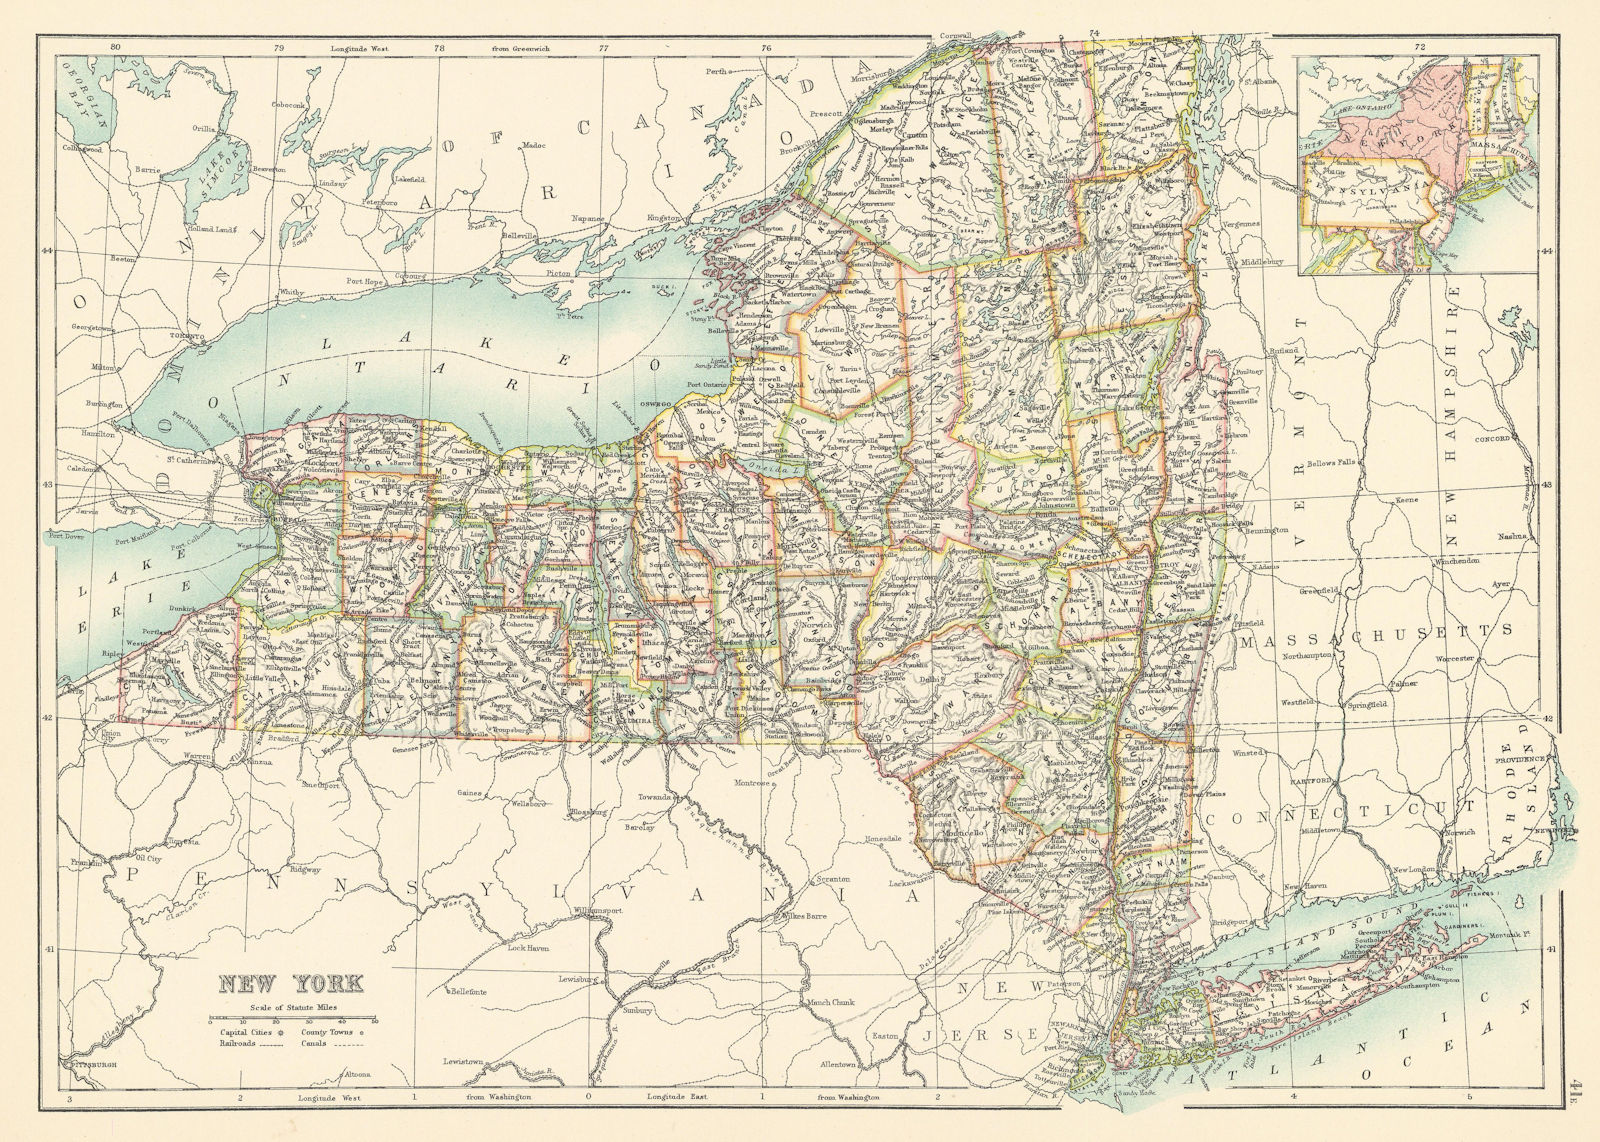 New York state map showing counties. BARTHOLOMEW 1898 old antique chart